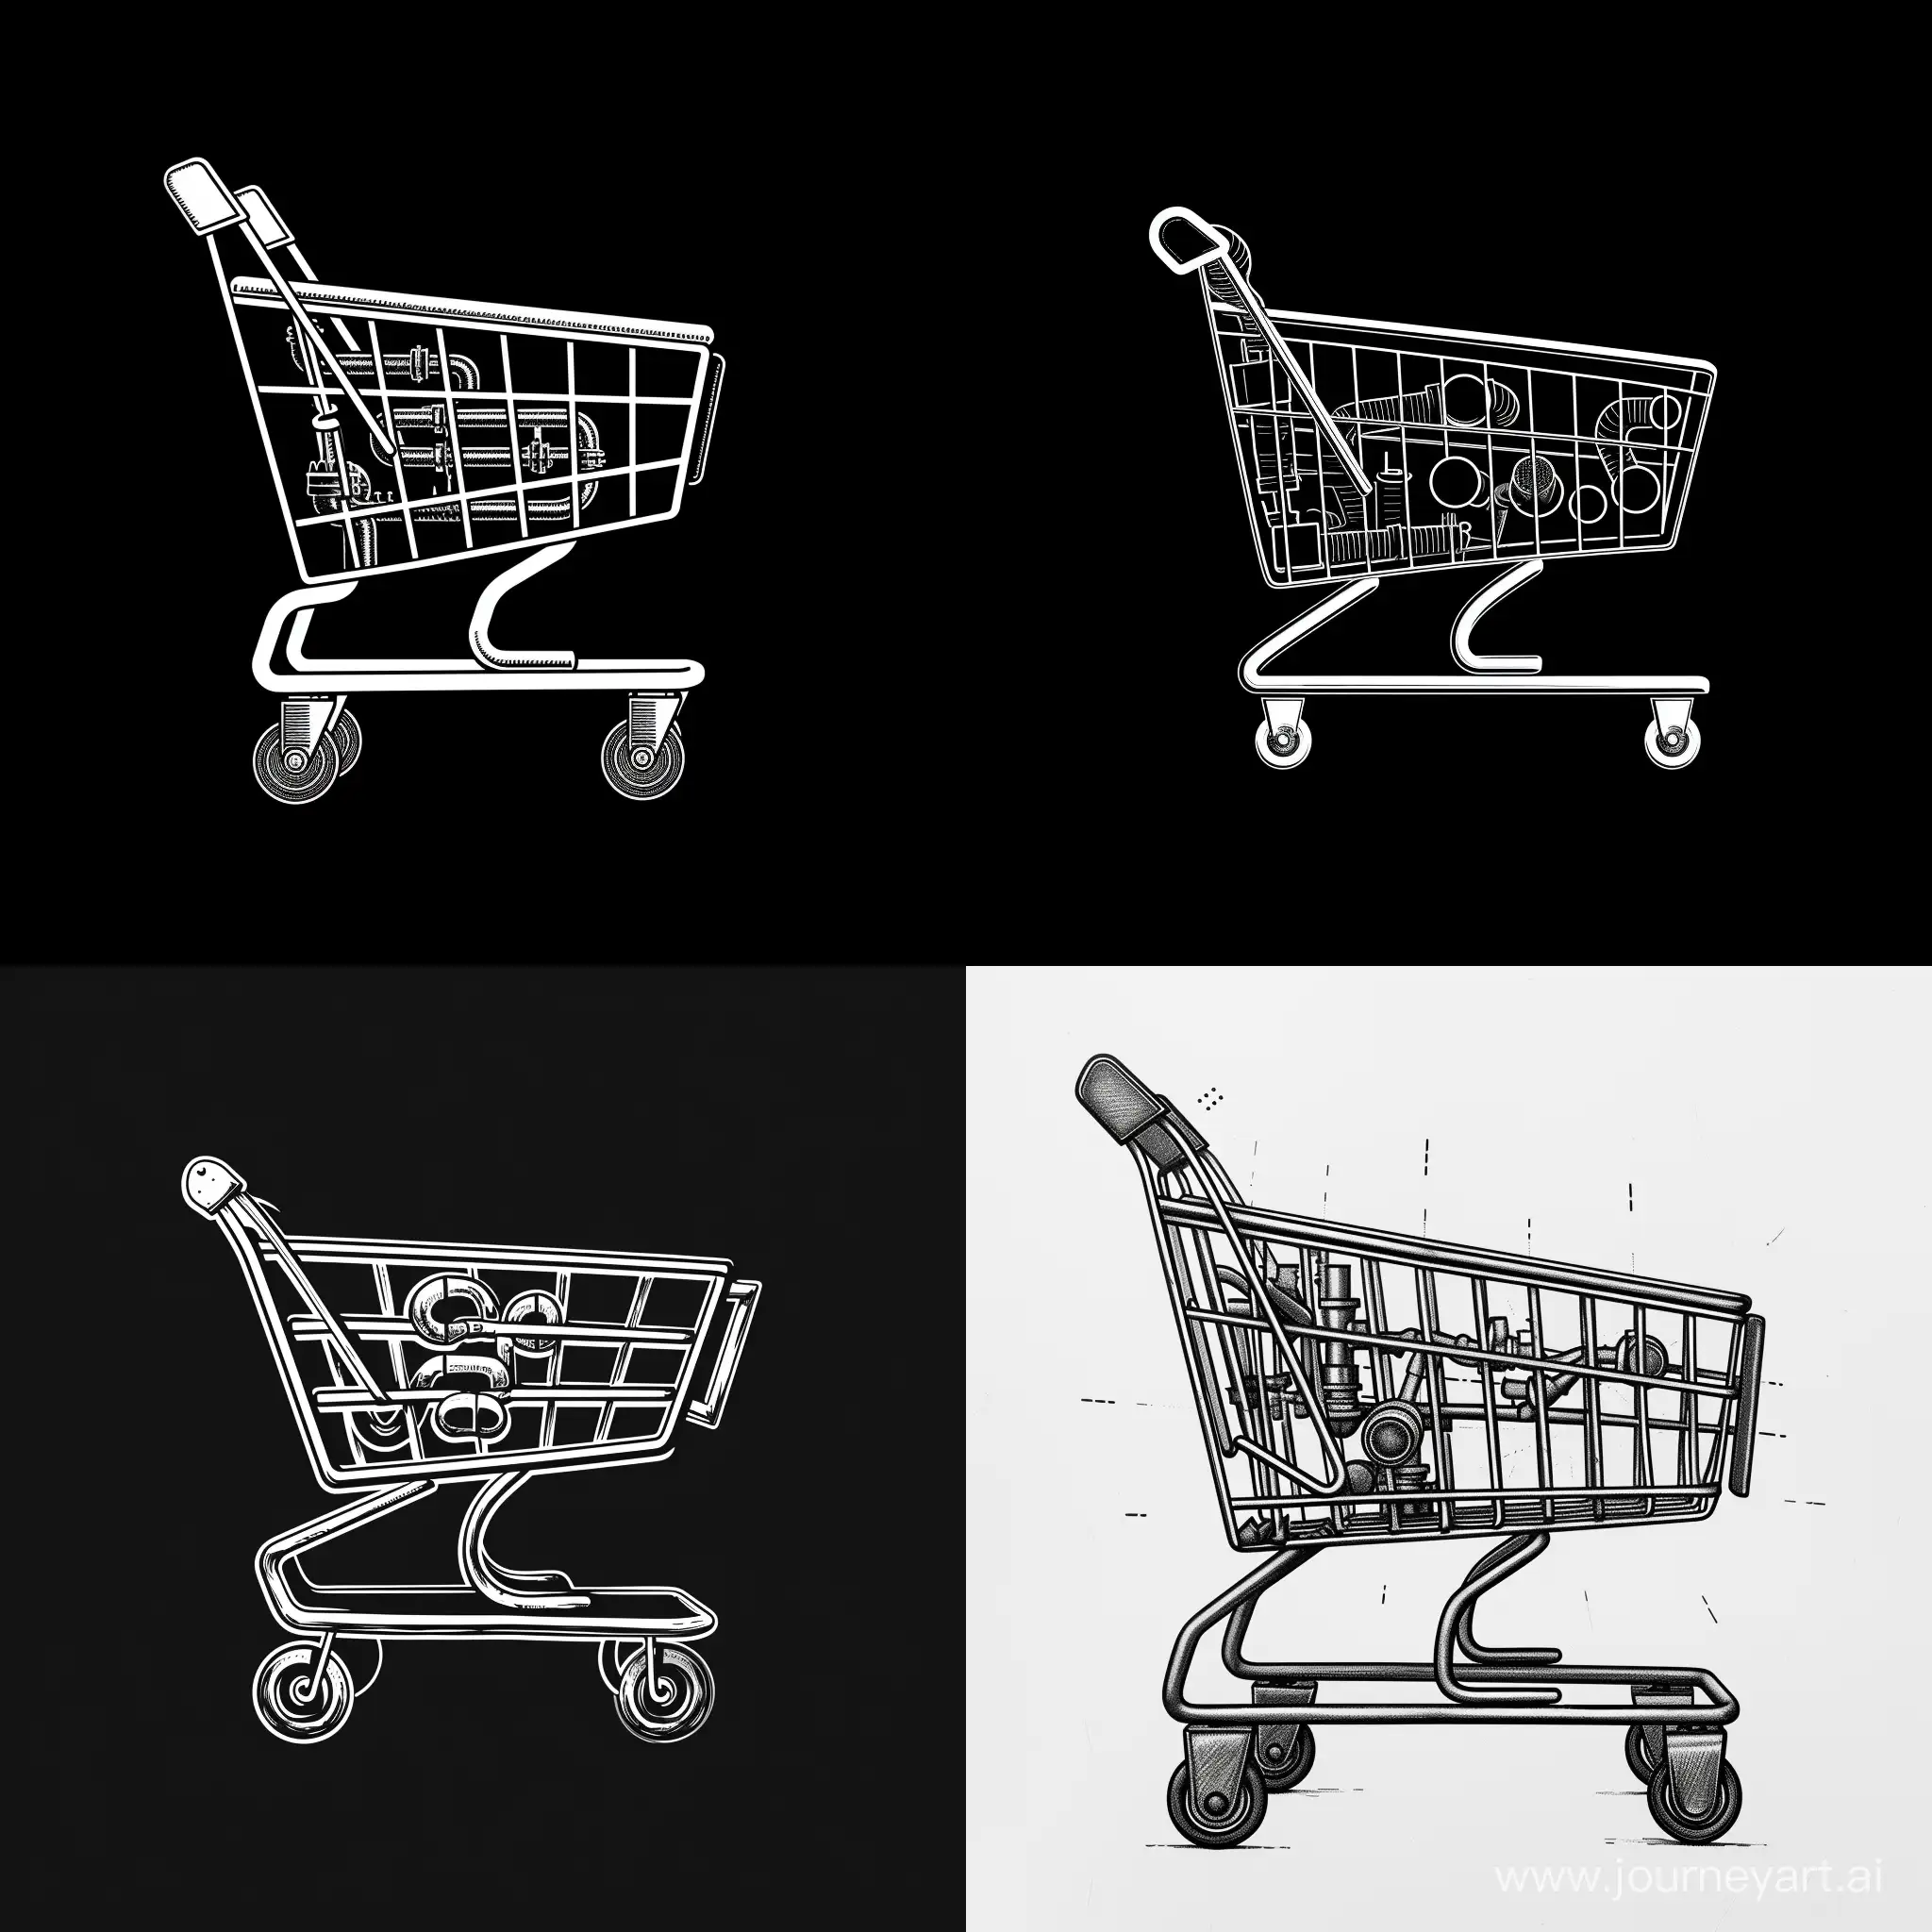 Minimalistic-Shopping-Cart-Logo-with-Pipes-BW-Vector-Illustration